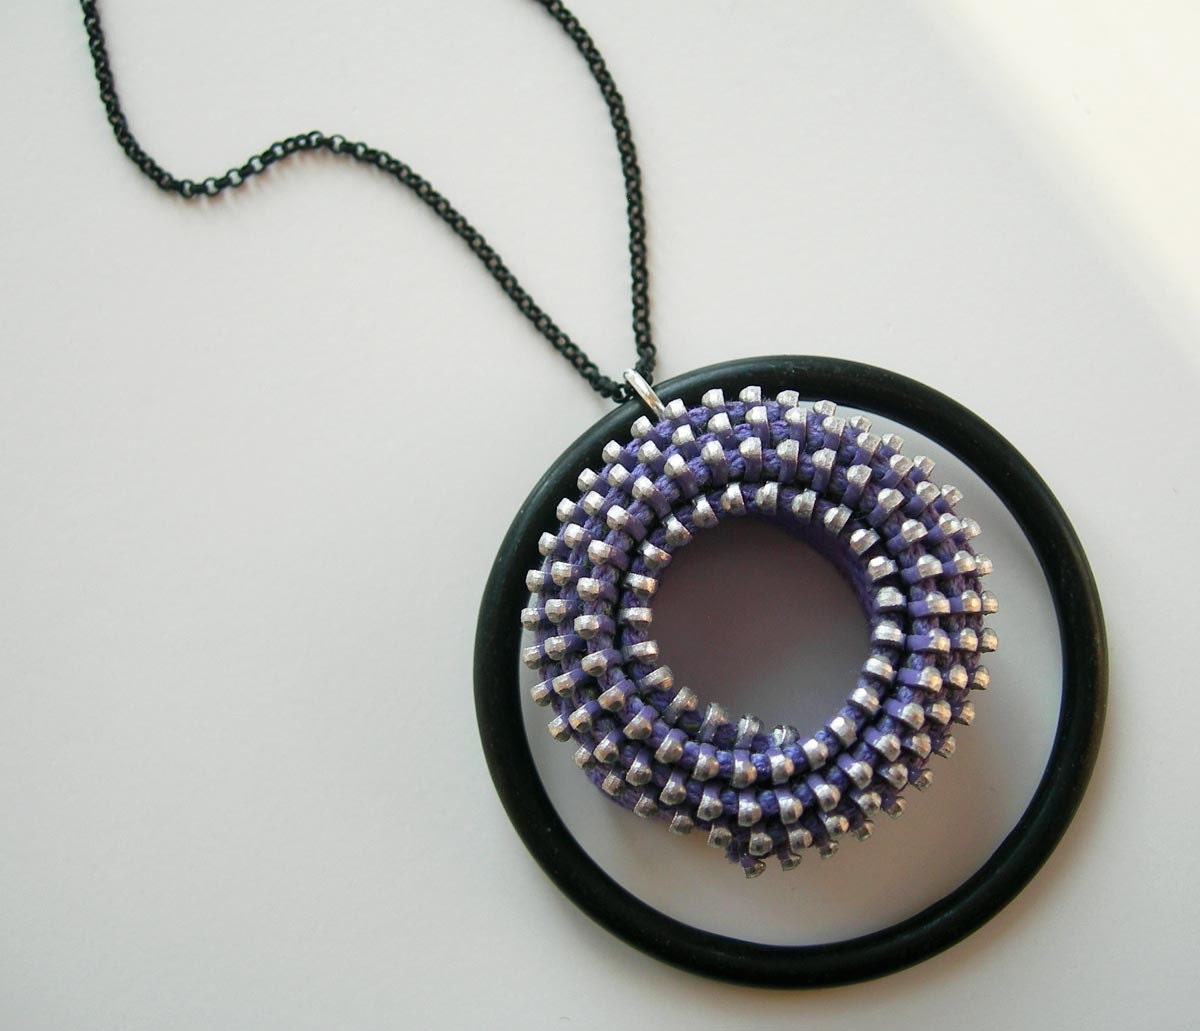 Lavender Vintage Zipper Tape Spiral Necklace with Matte Black Ring and Chain